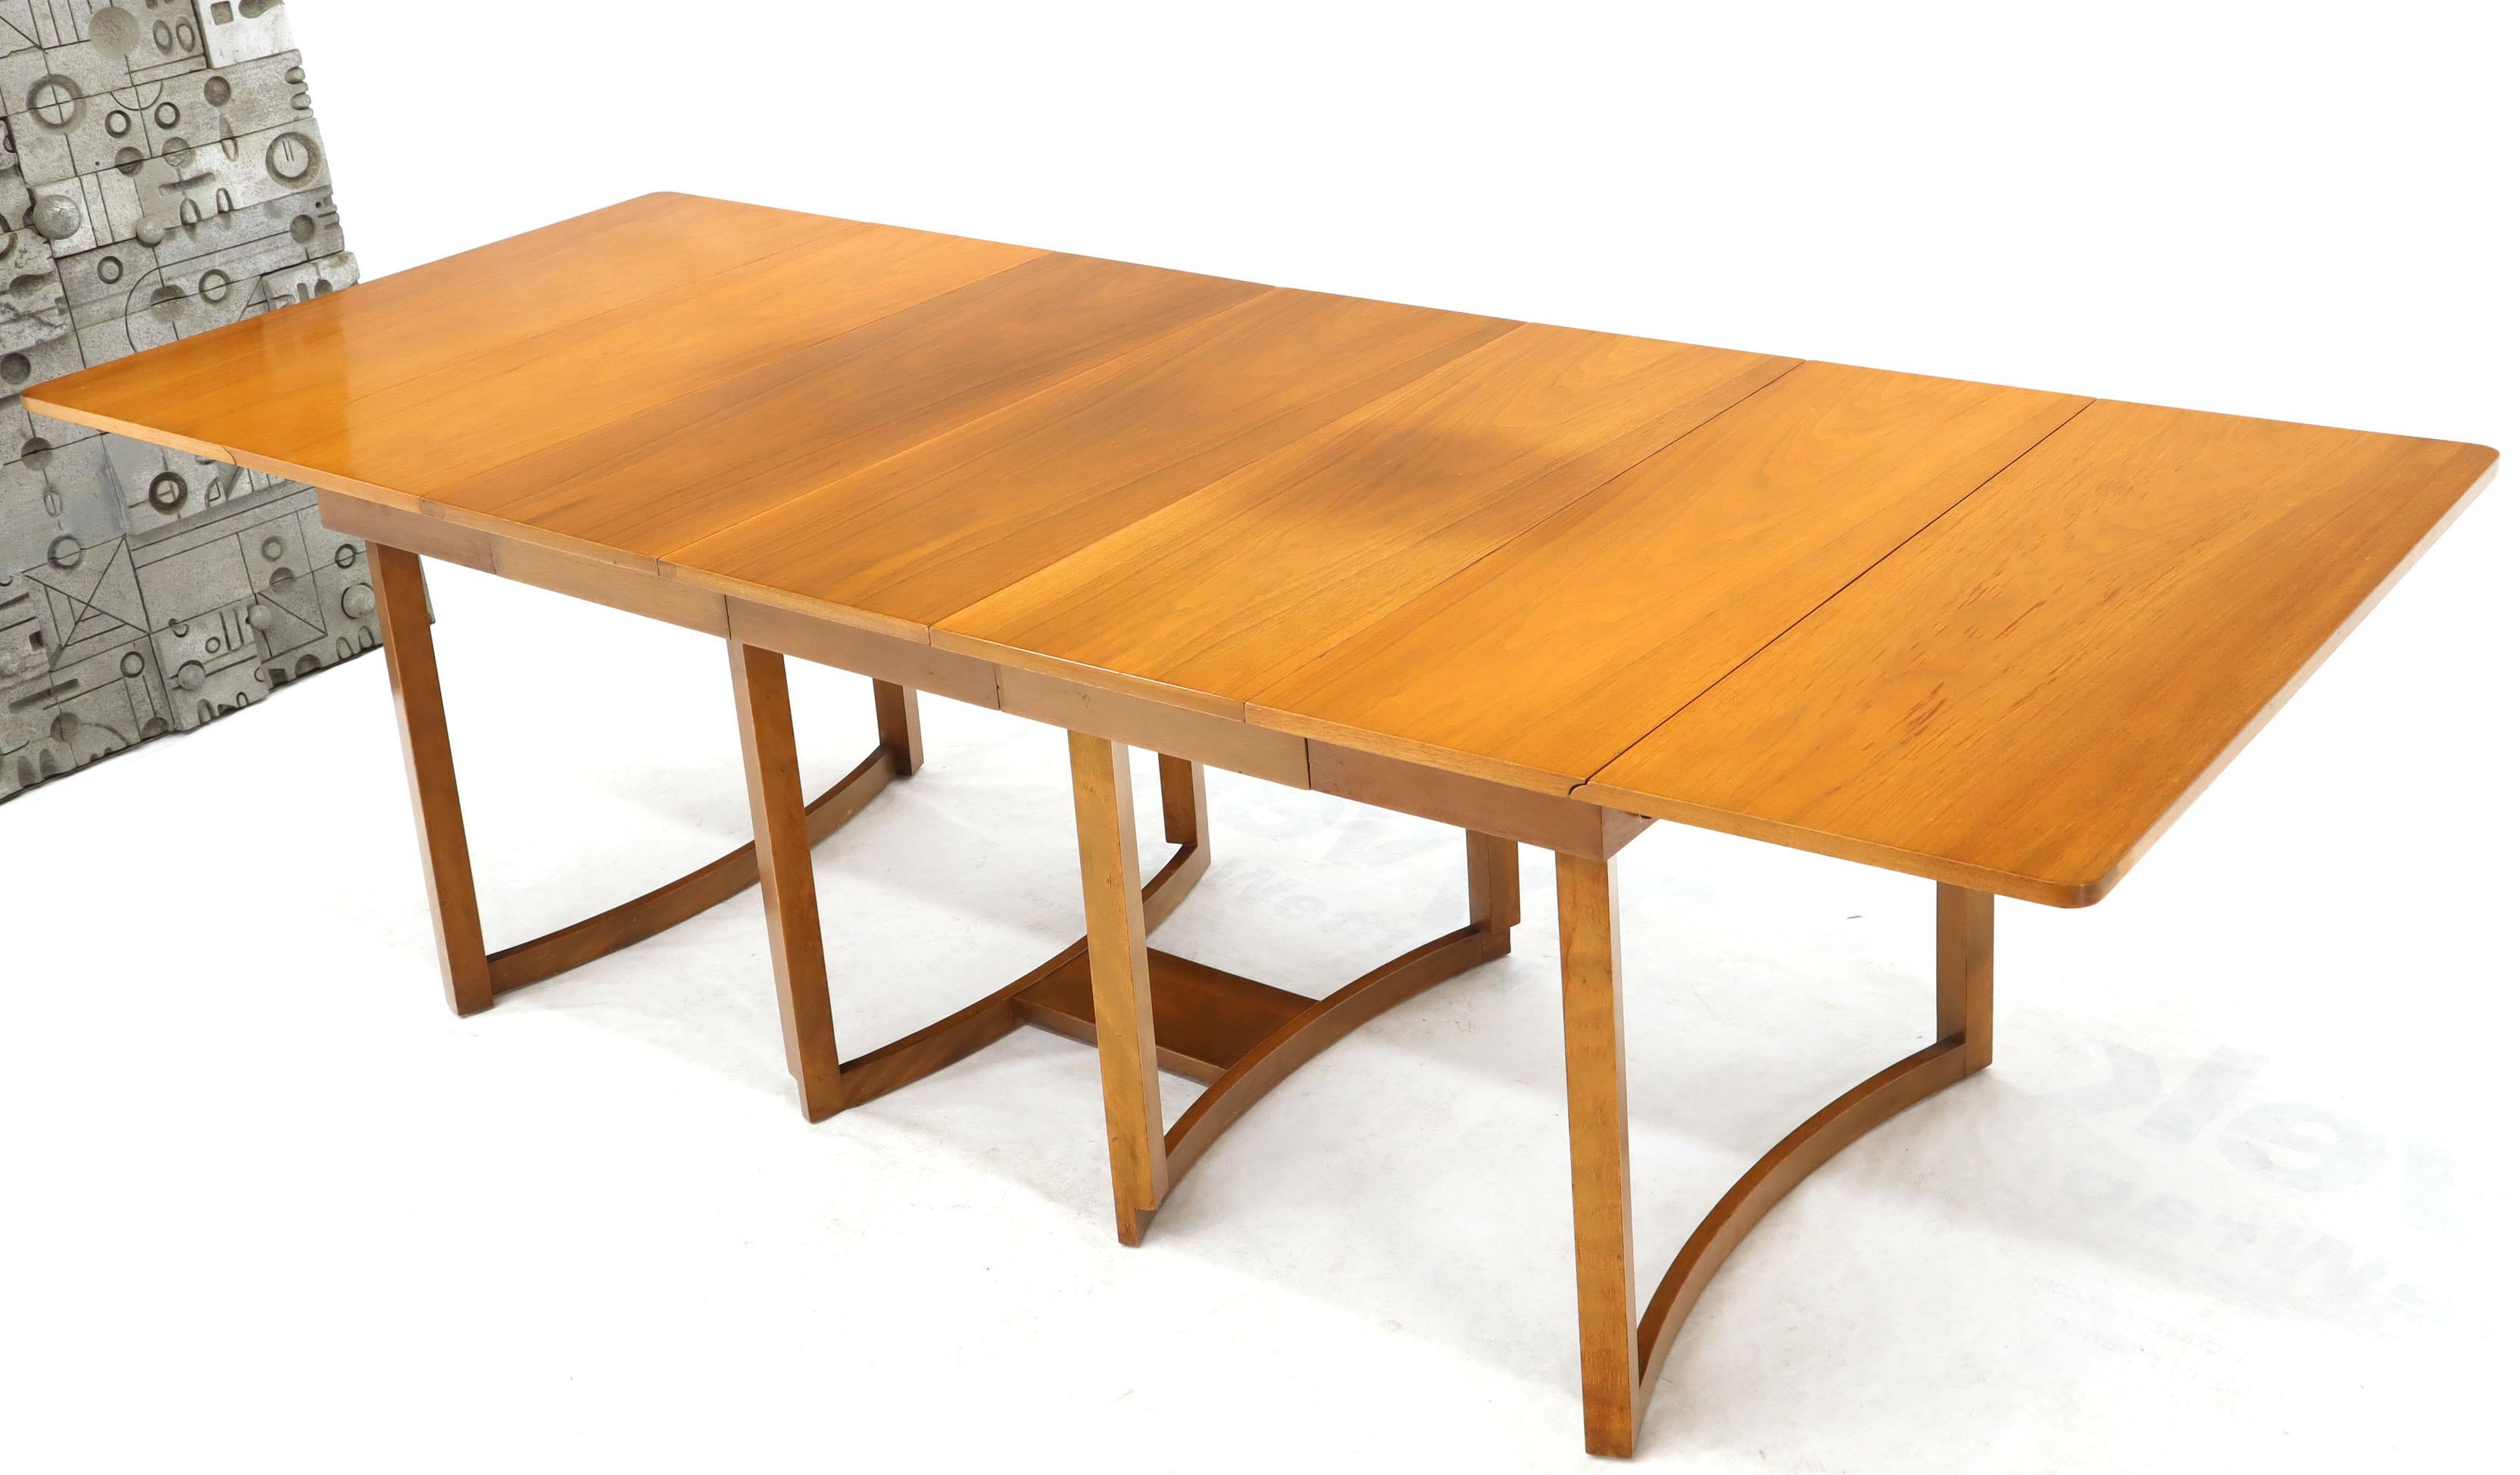 Midcentury Light Walnut Drop Leaf Expandable Dining Table, Three Leafs Boards im Angebot 7